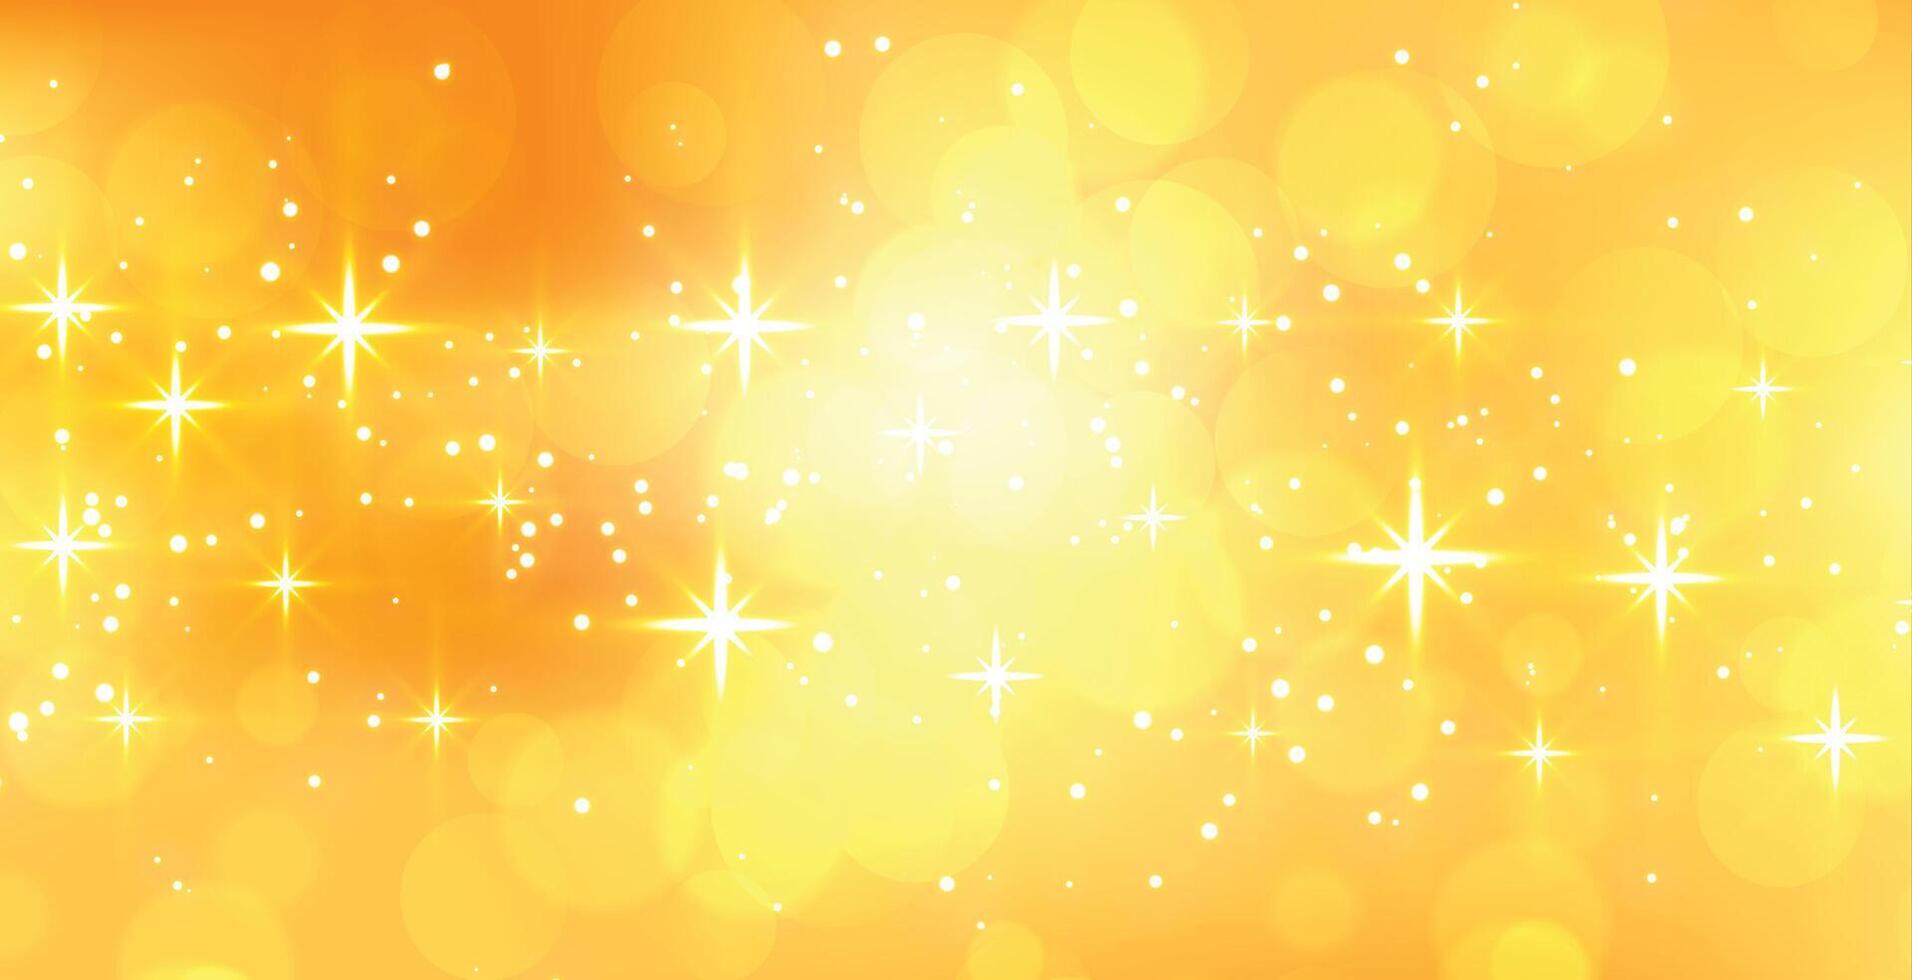 abstract sparkling yellow banner with text space vector